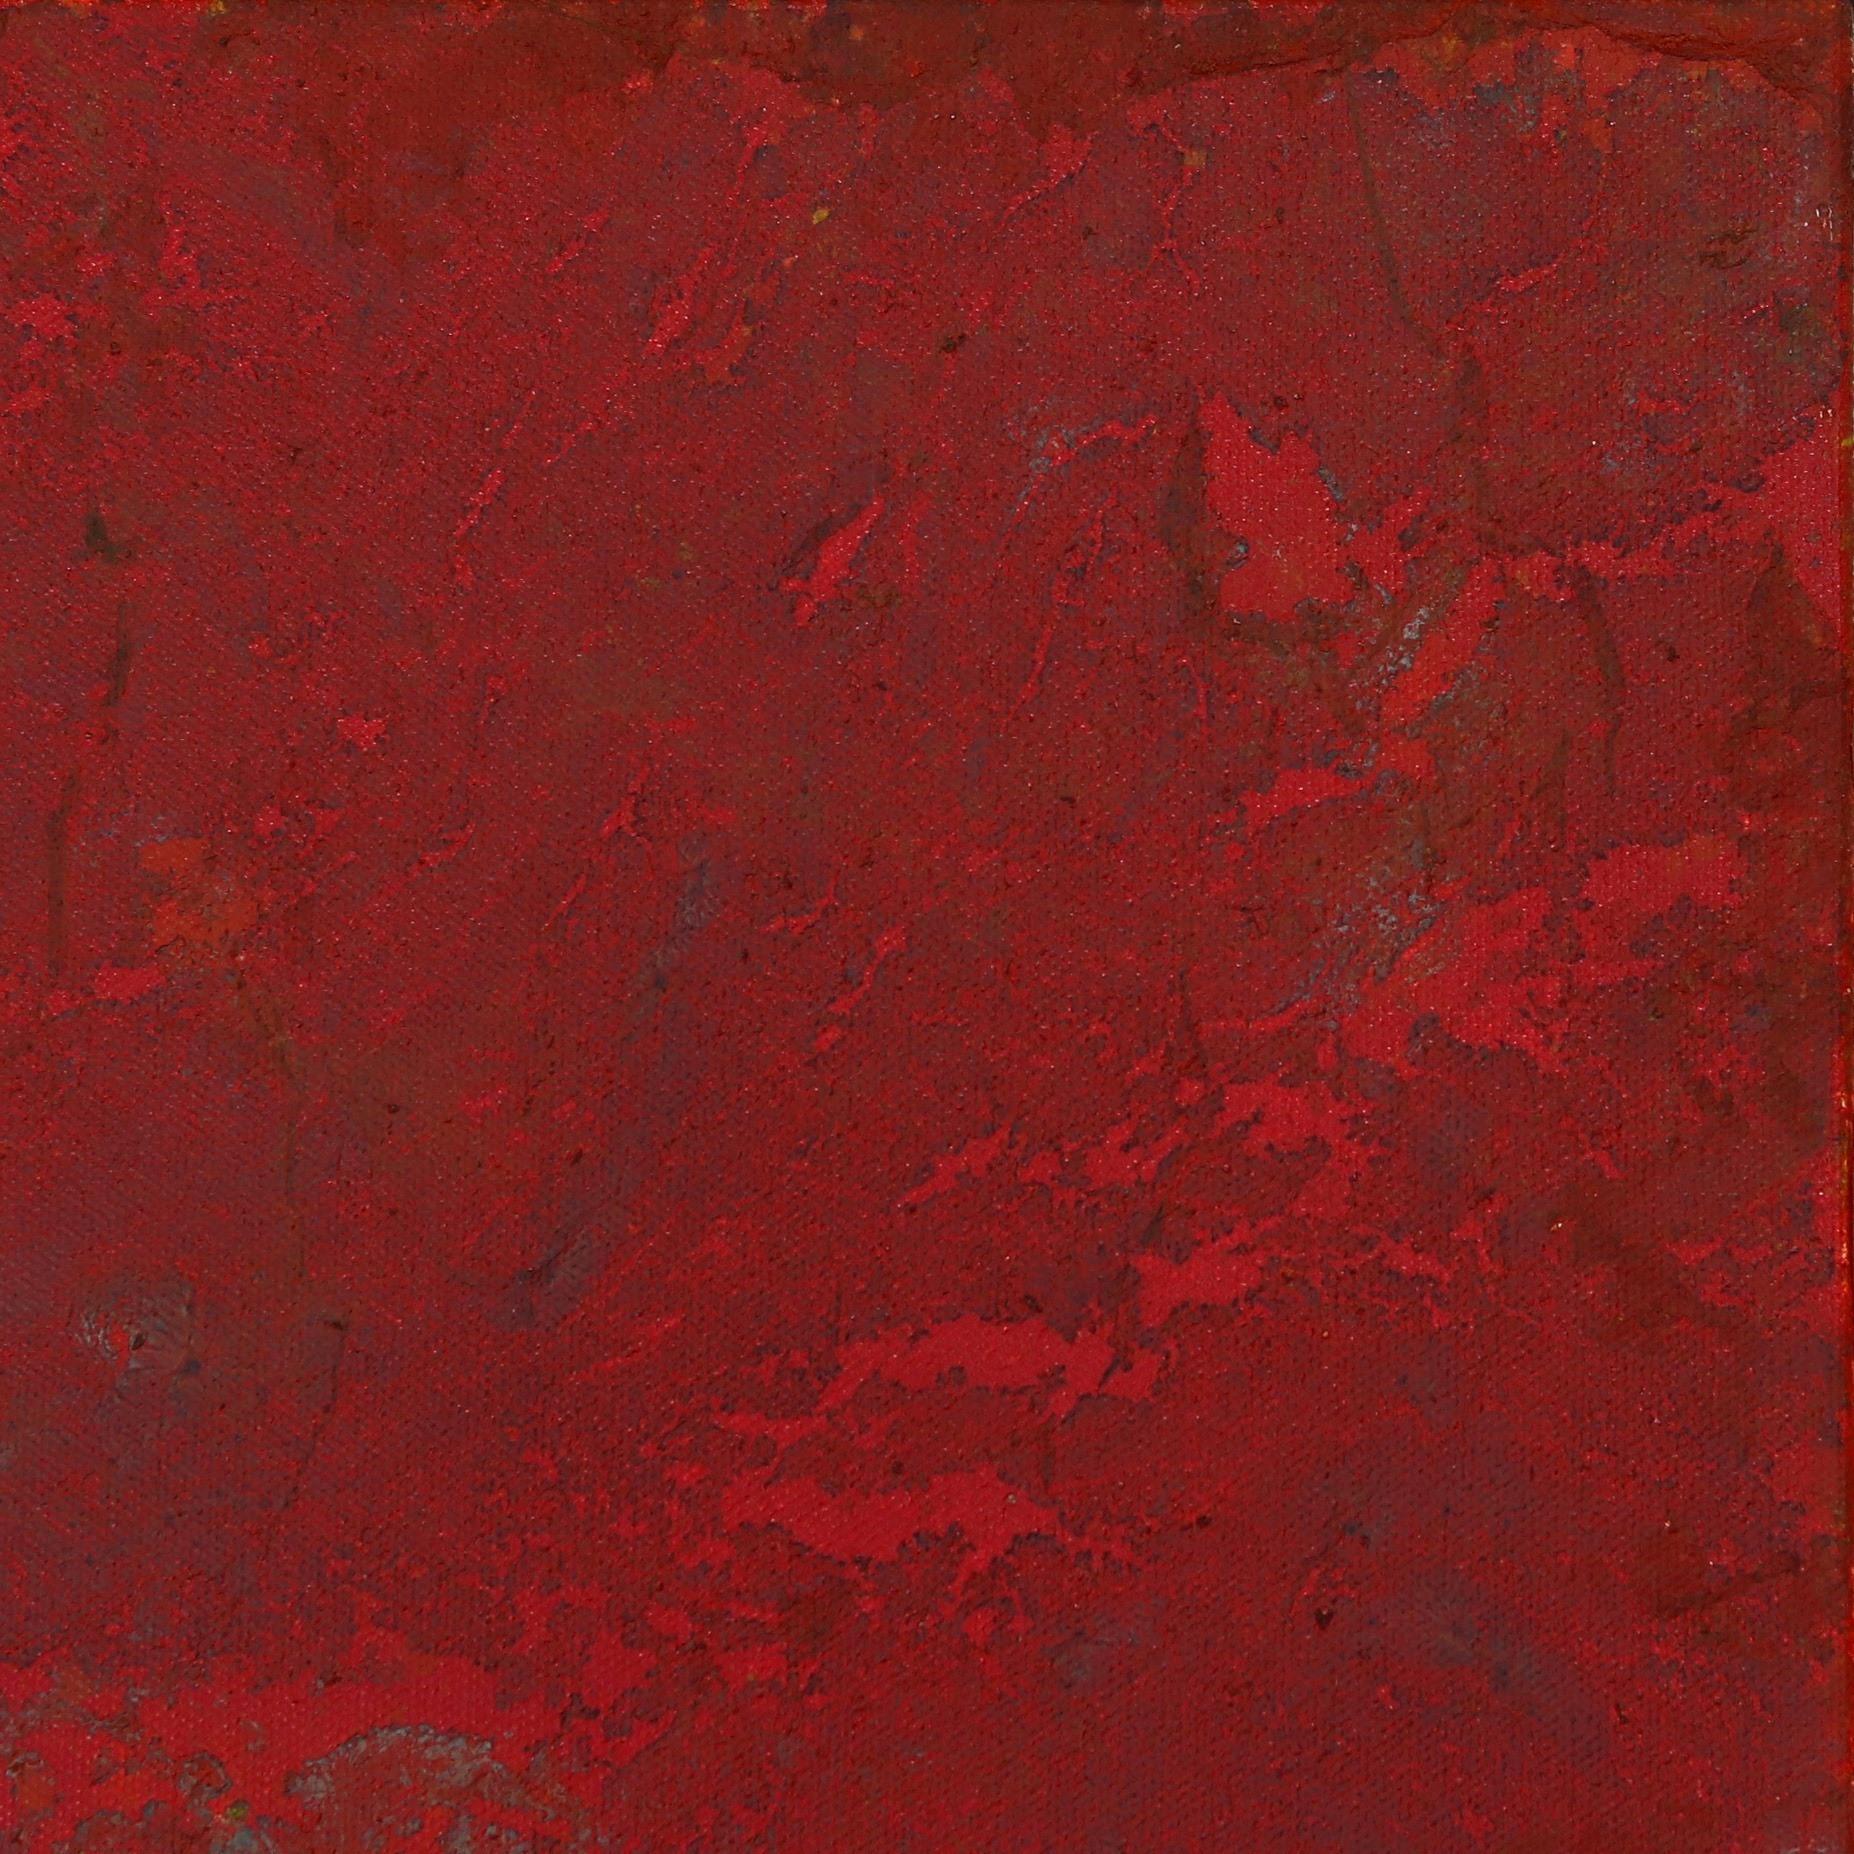 A312 - Minimalist Abstract Contemporary Original Red Textural Artwork For Sale 2